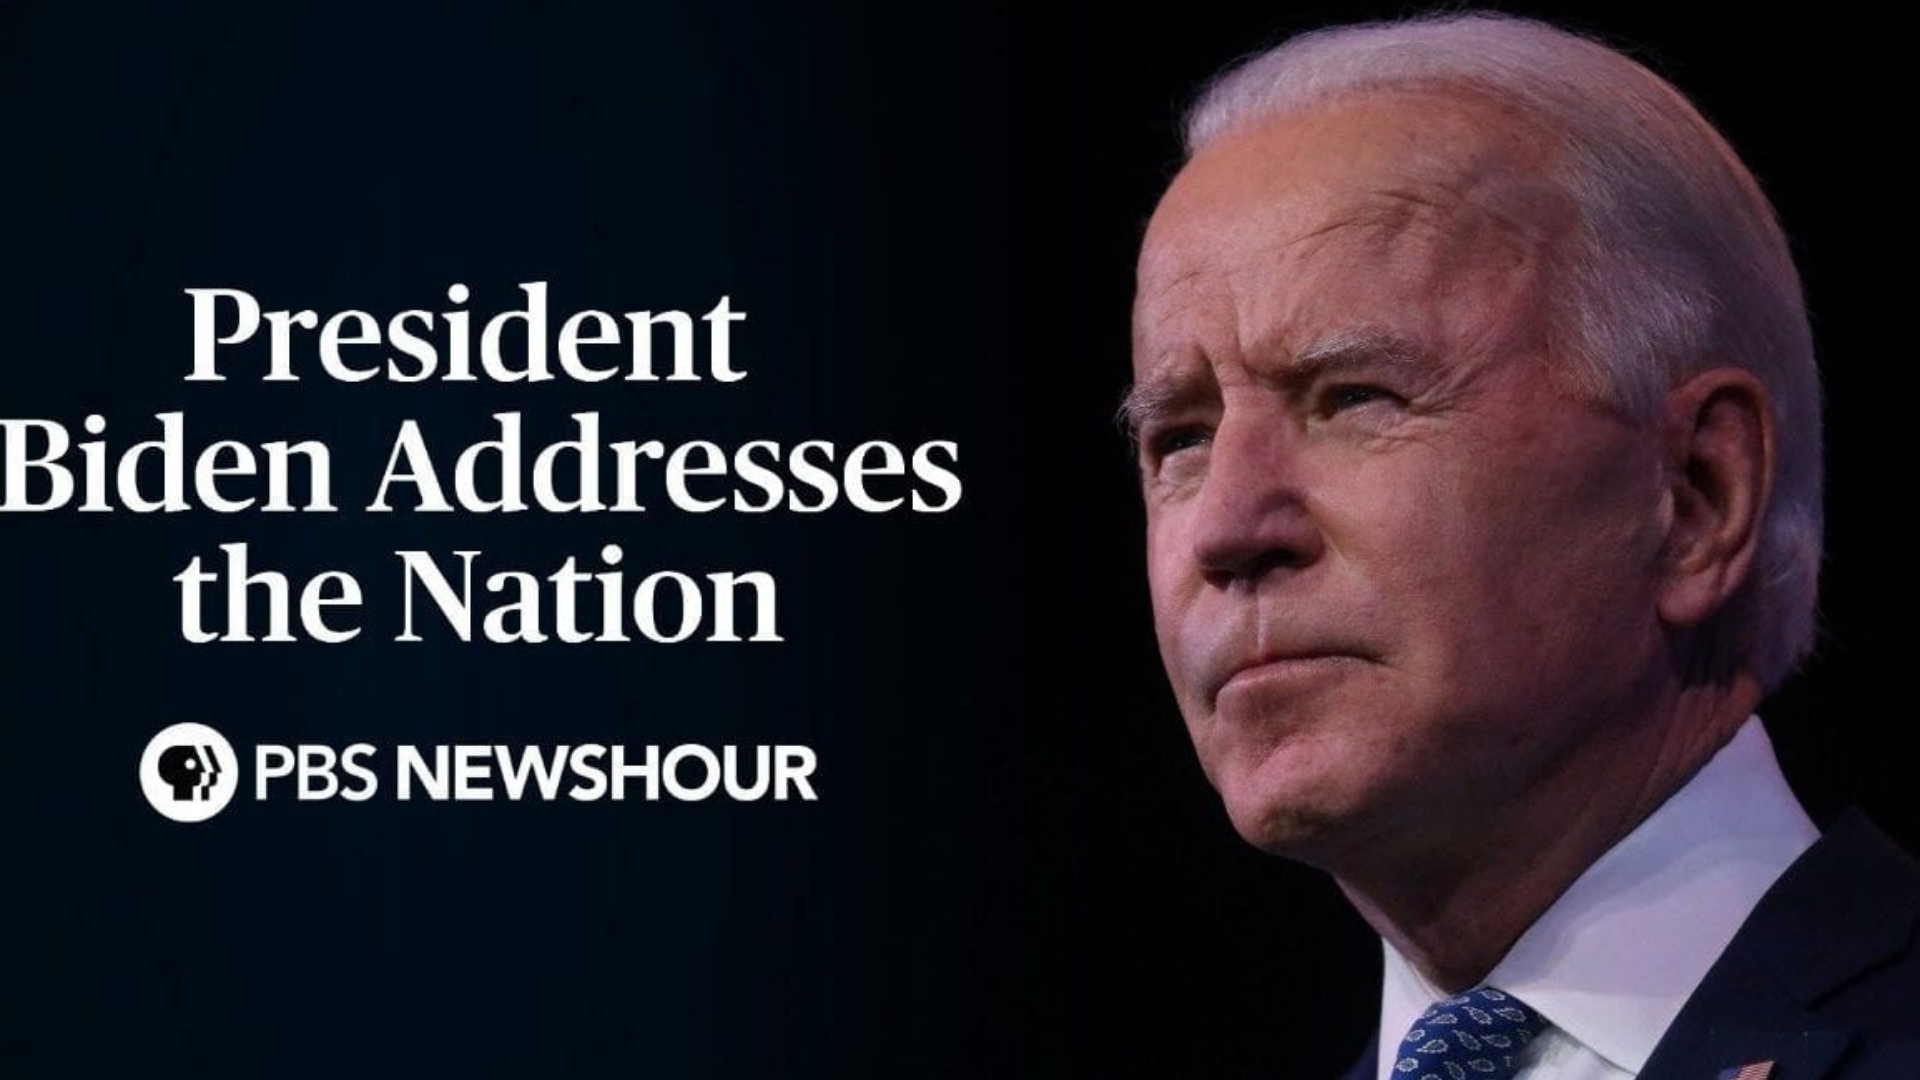 President Biden to Address the Nation on One-Year Anniversary of the COVID-19 Shutdown